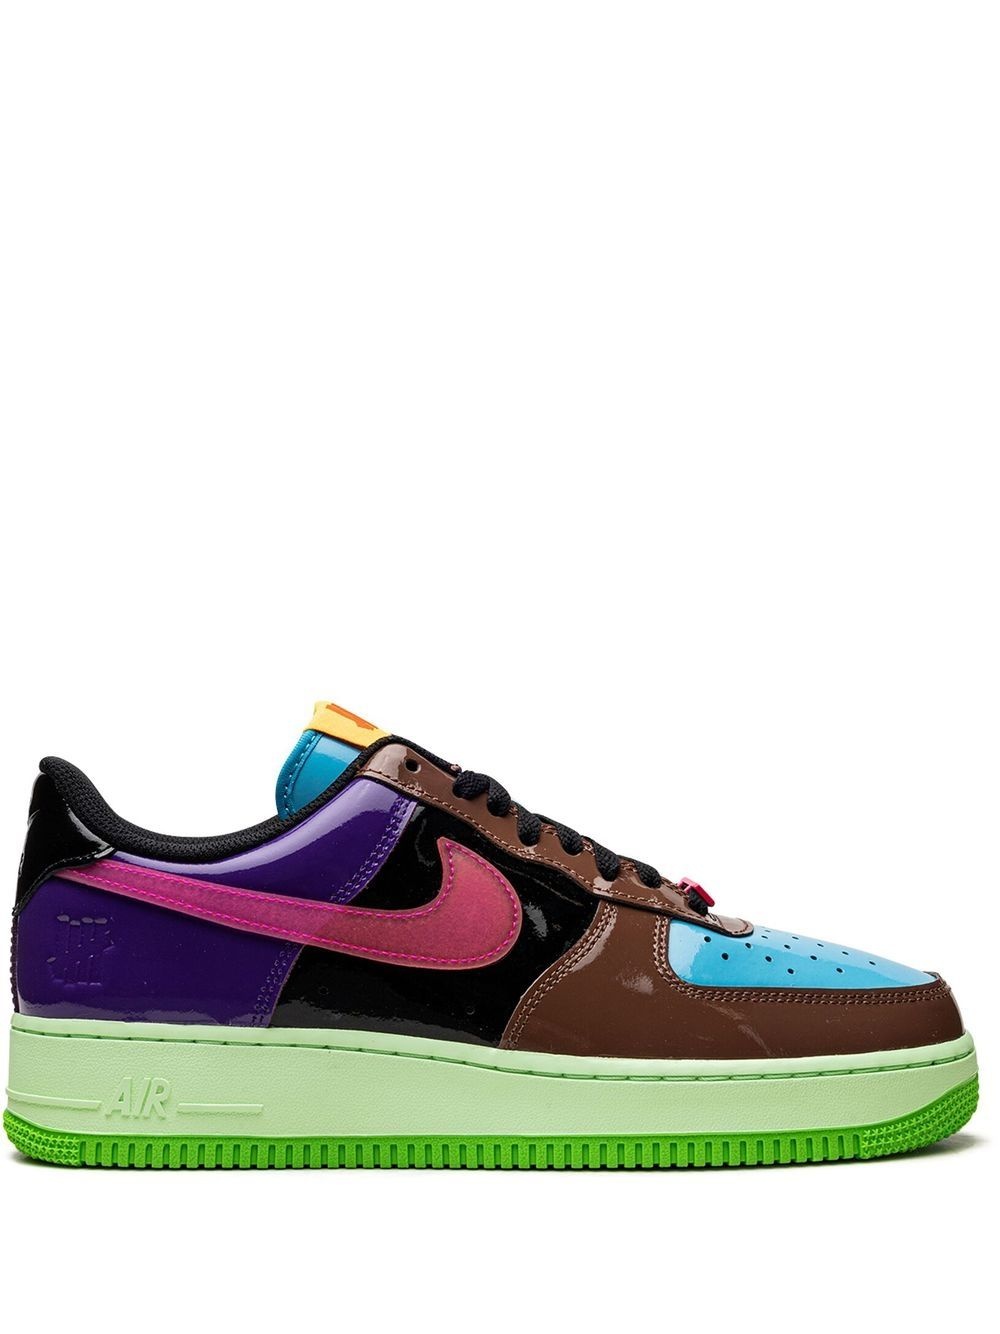 x Undefeated Air Force 1 Low "Pink Prime" sneakers - 1